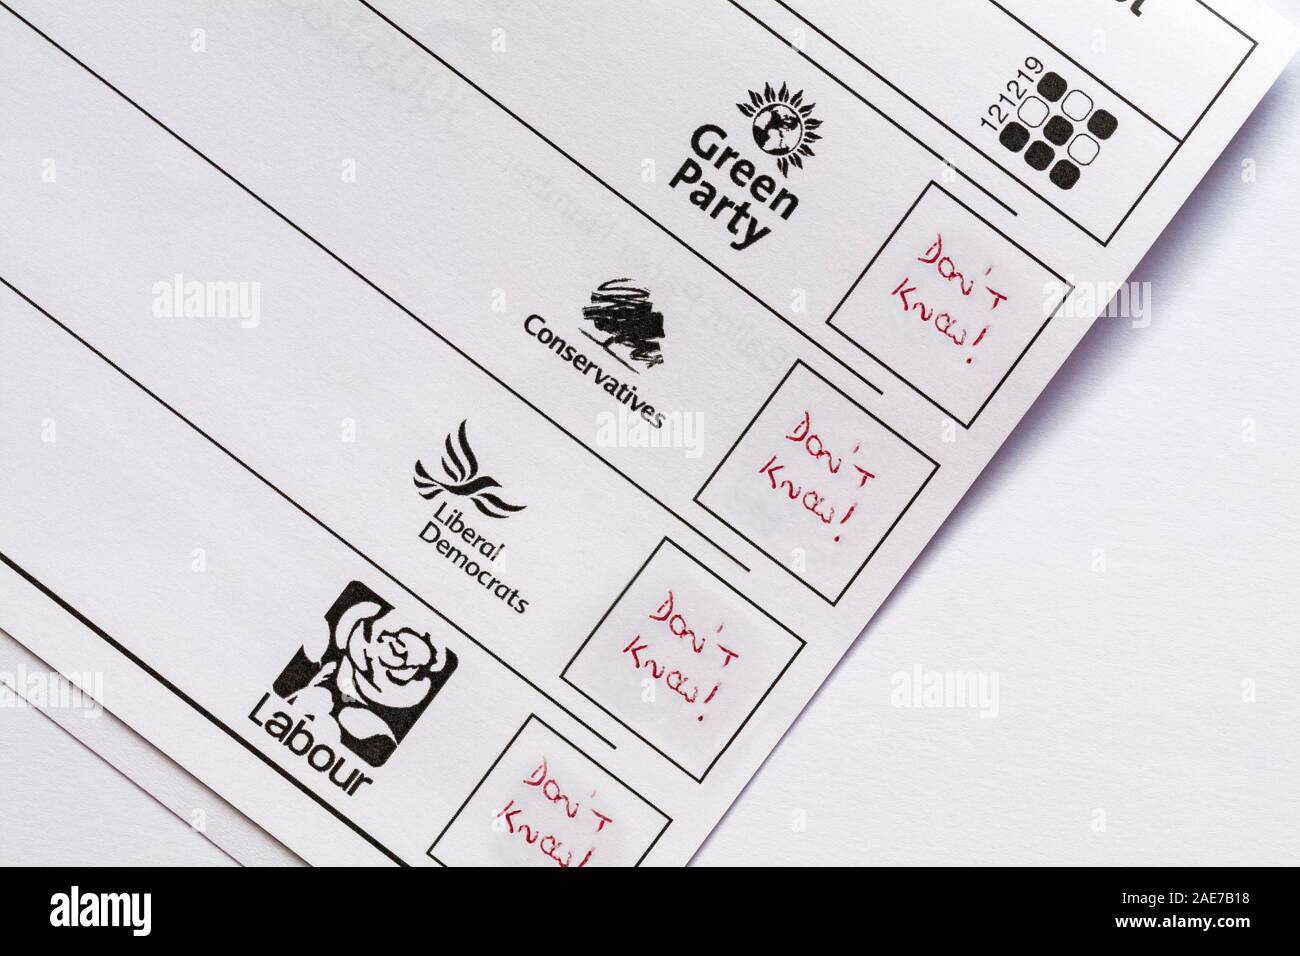 Spoiled spoilt ballot paper for forthcoming Parliamentary Election 2019 in UK - wasted vote Stock Photo